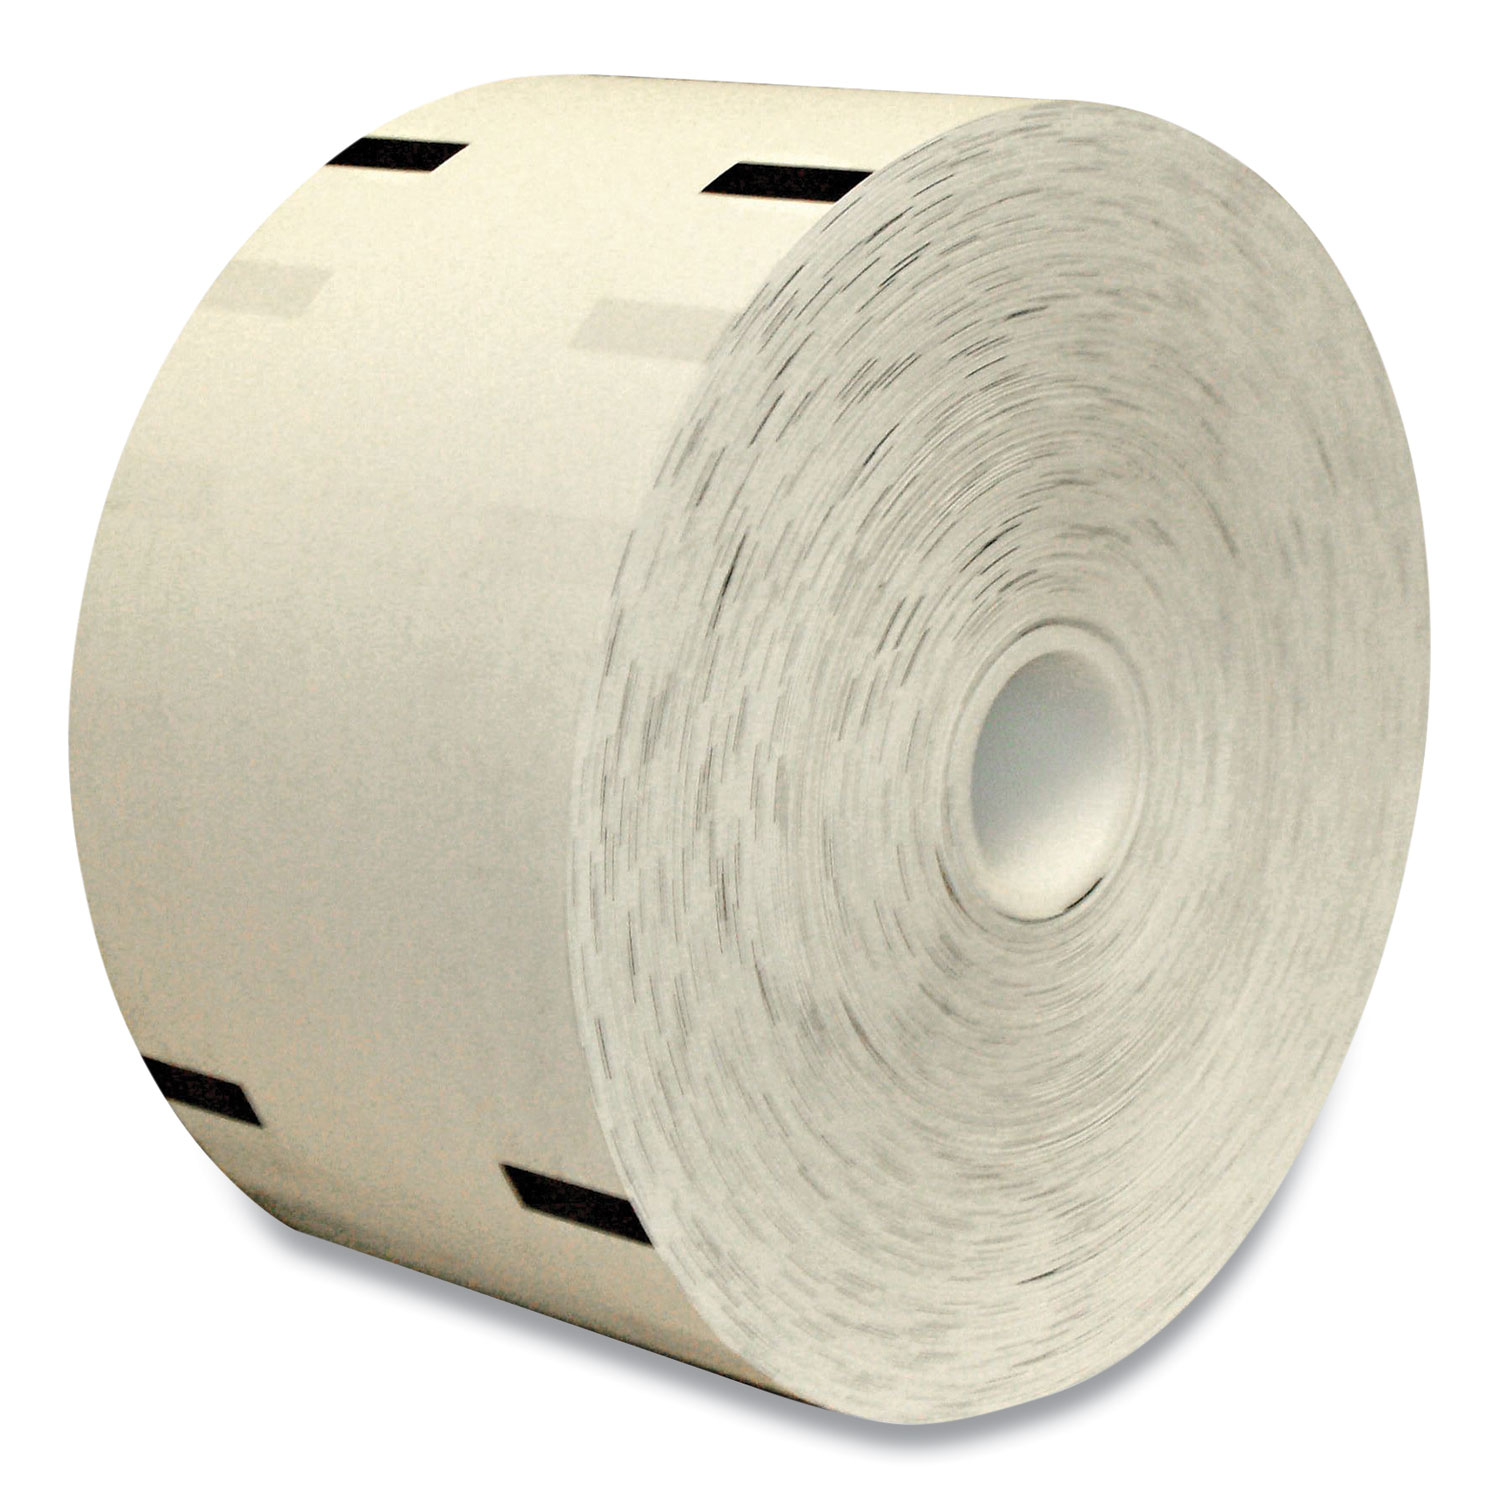  Control Papers 575293 Thermal ATM Receipt Roll, 3.12 x 1,000 ft, White, 4/Carton (CNK928069) 